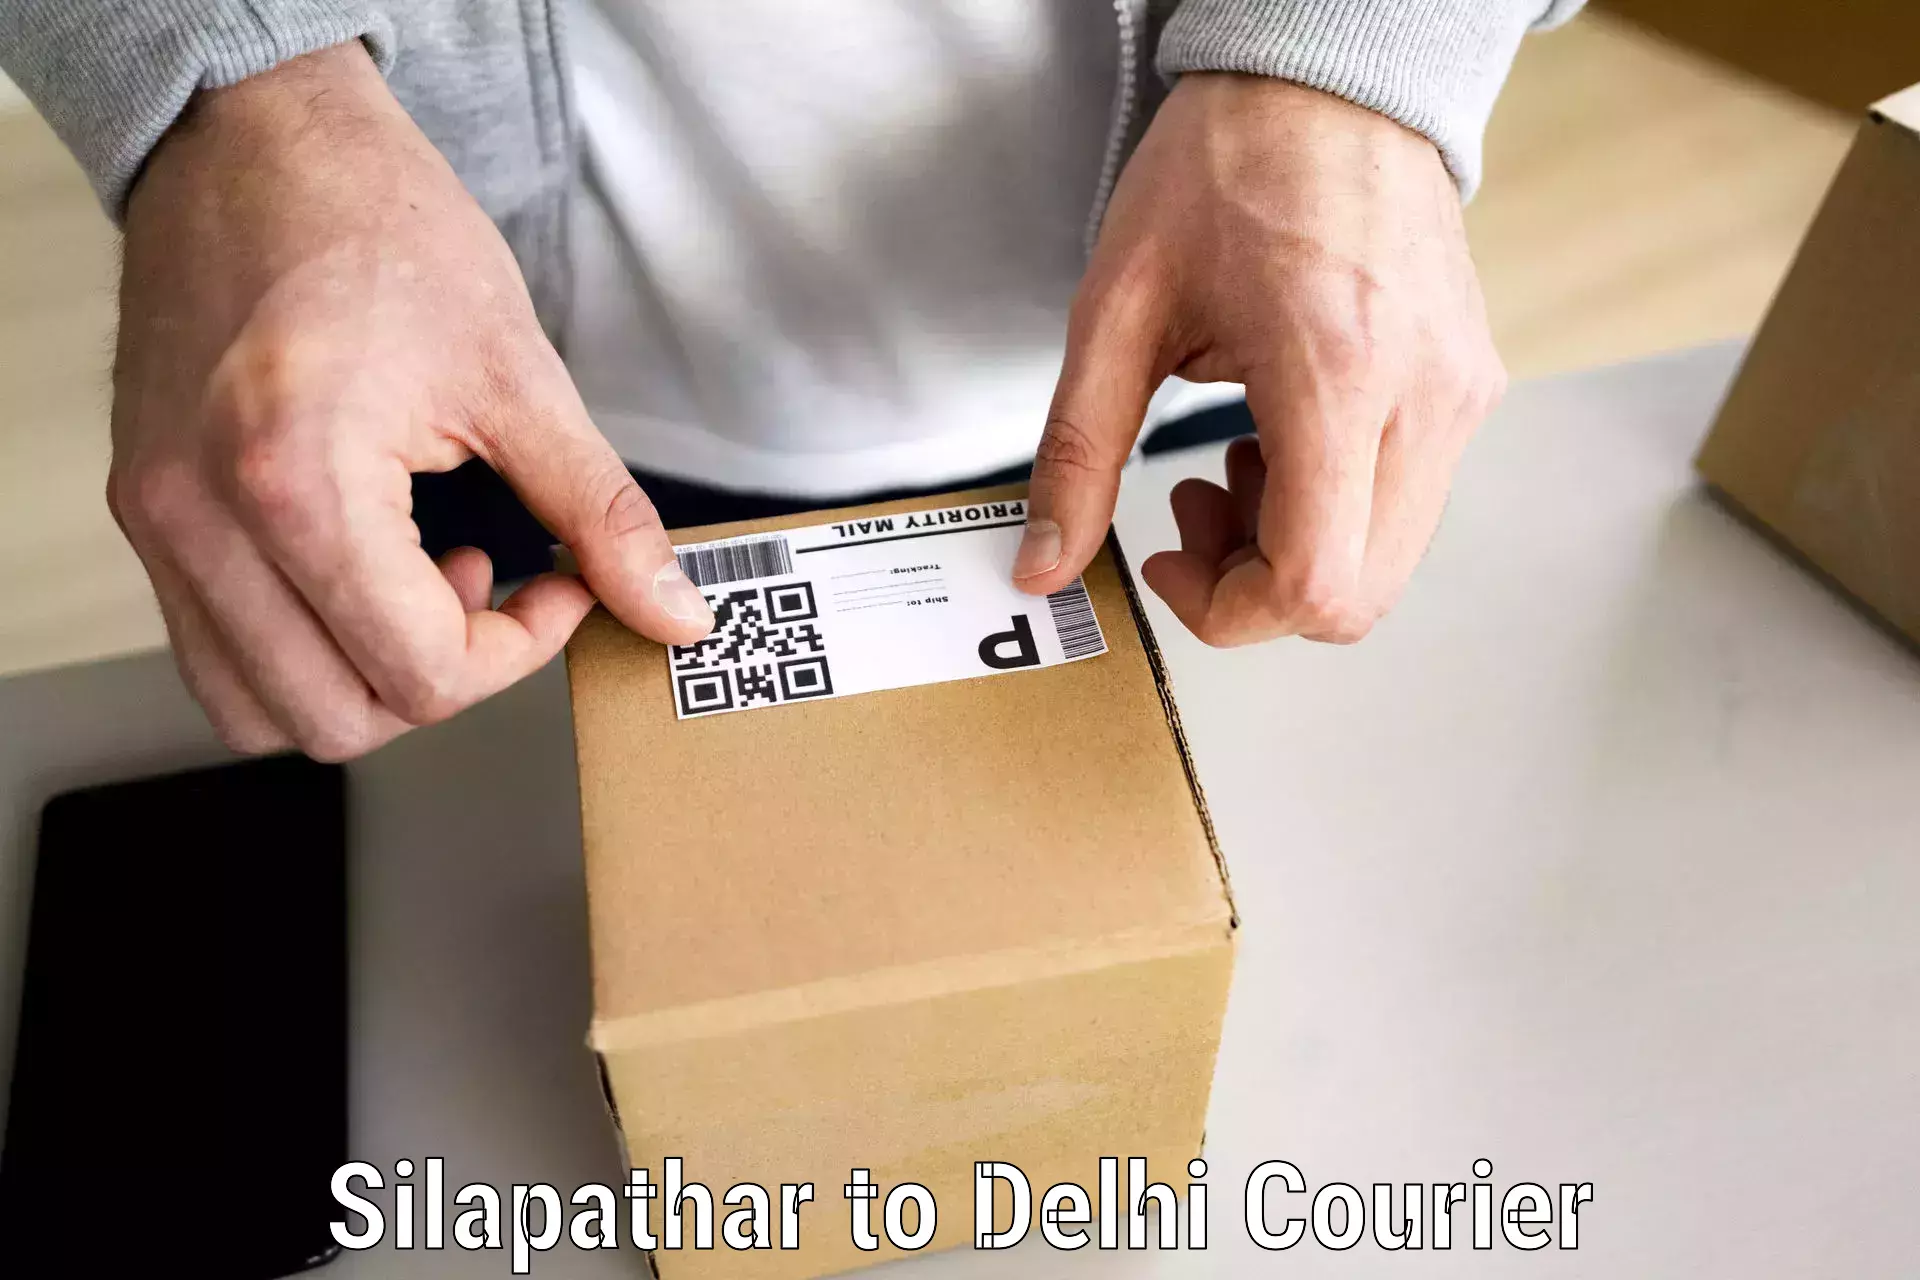 Quality furniture shipping Silapathar to Lodhi Road